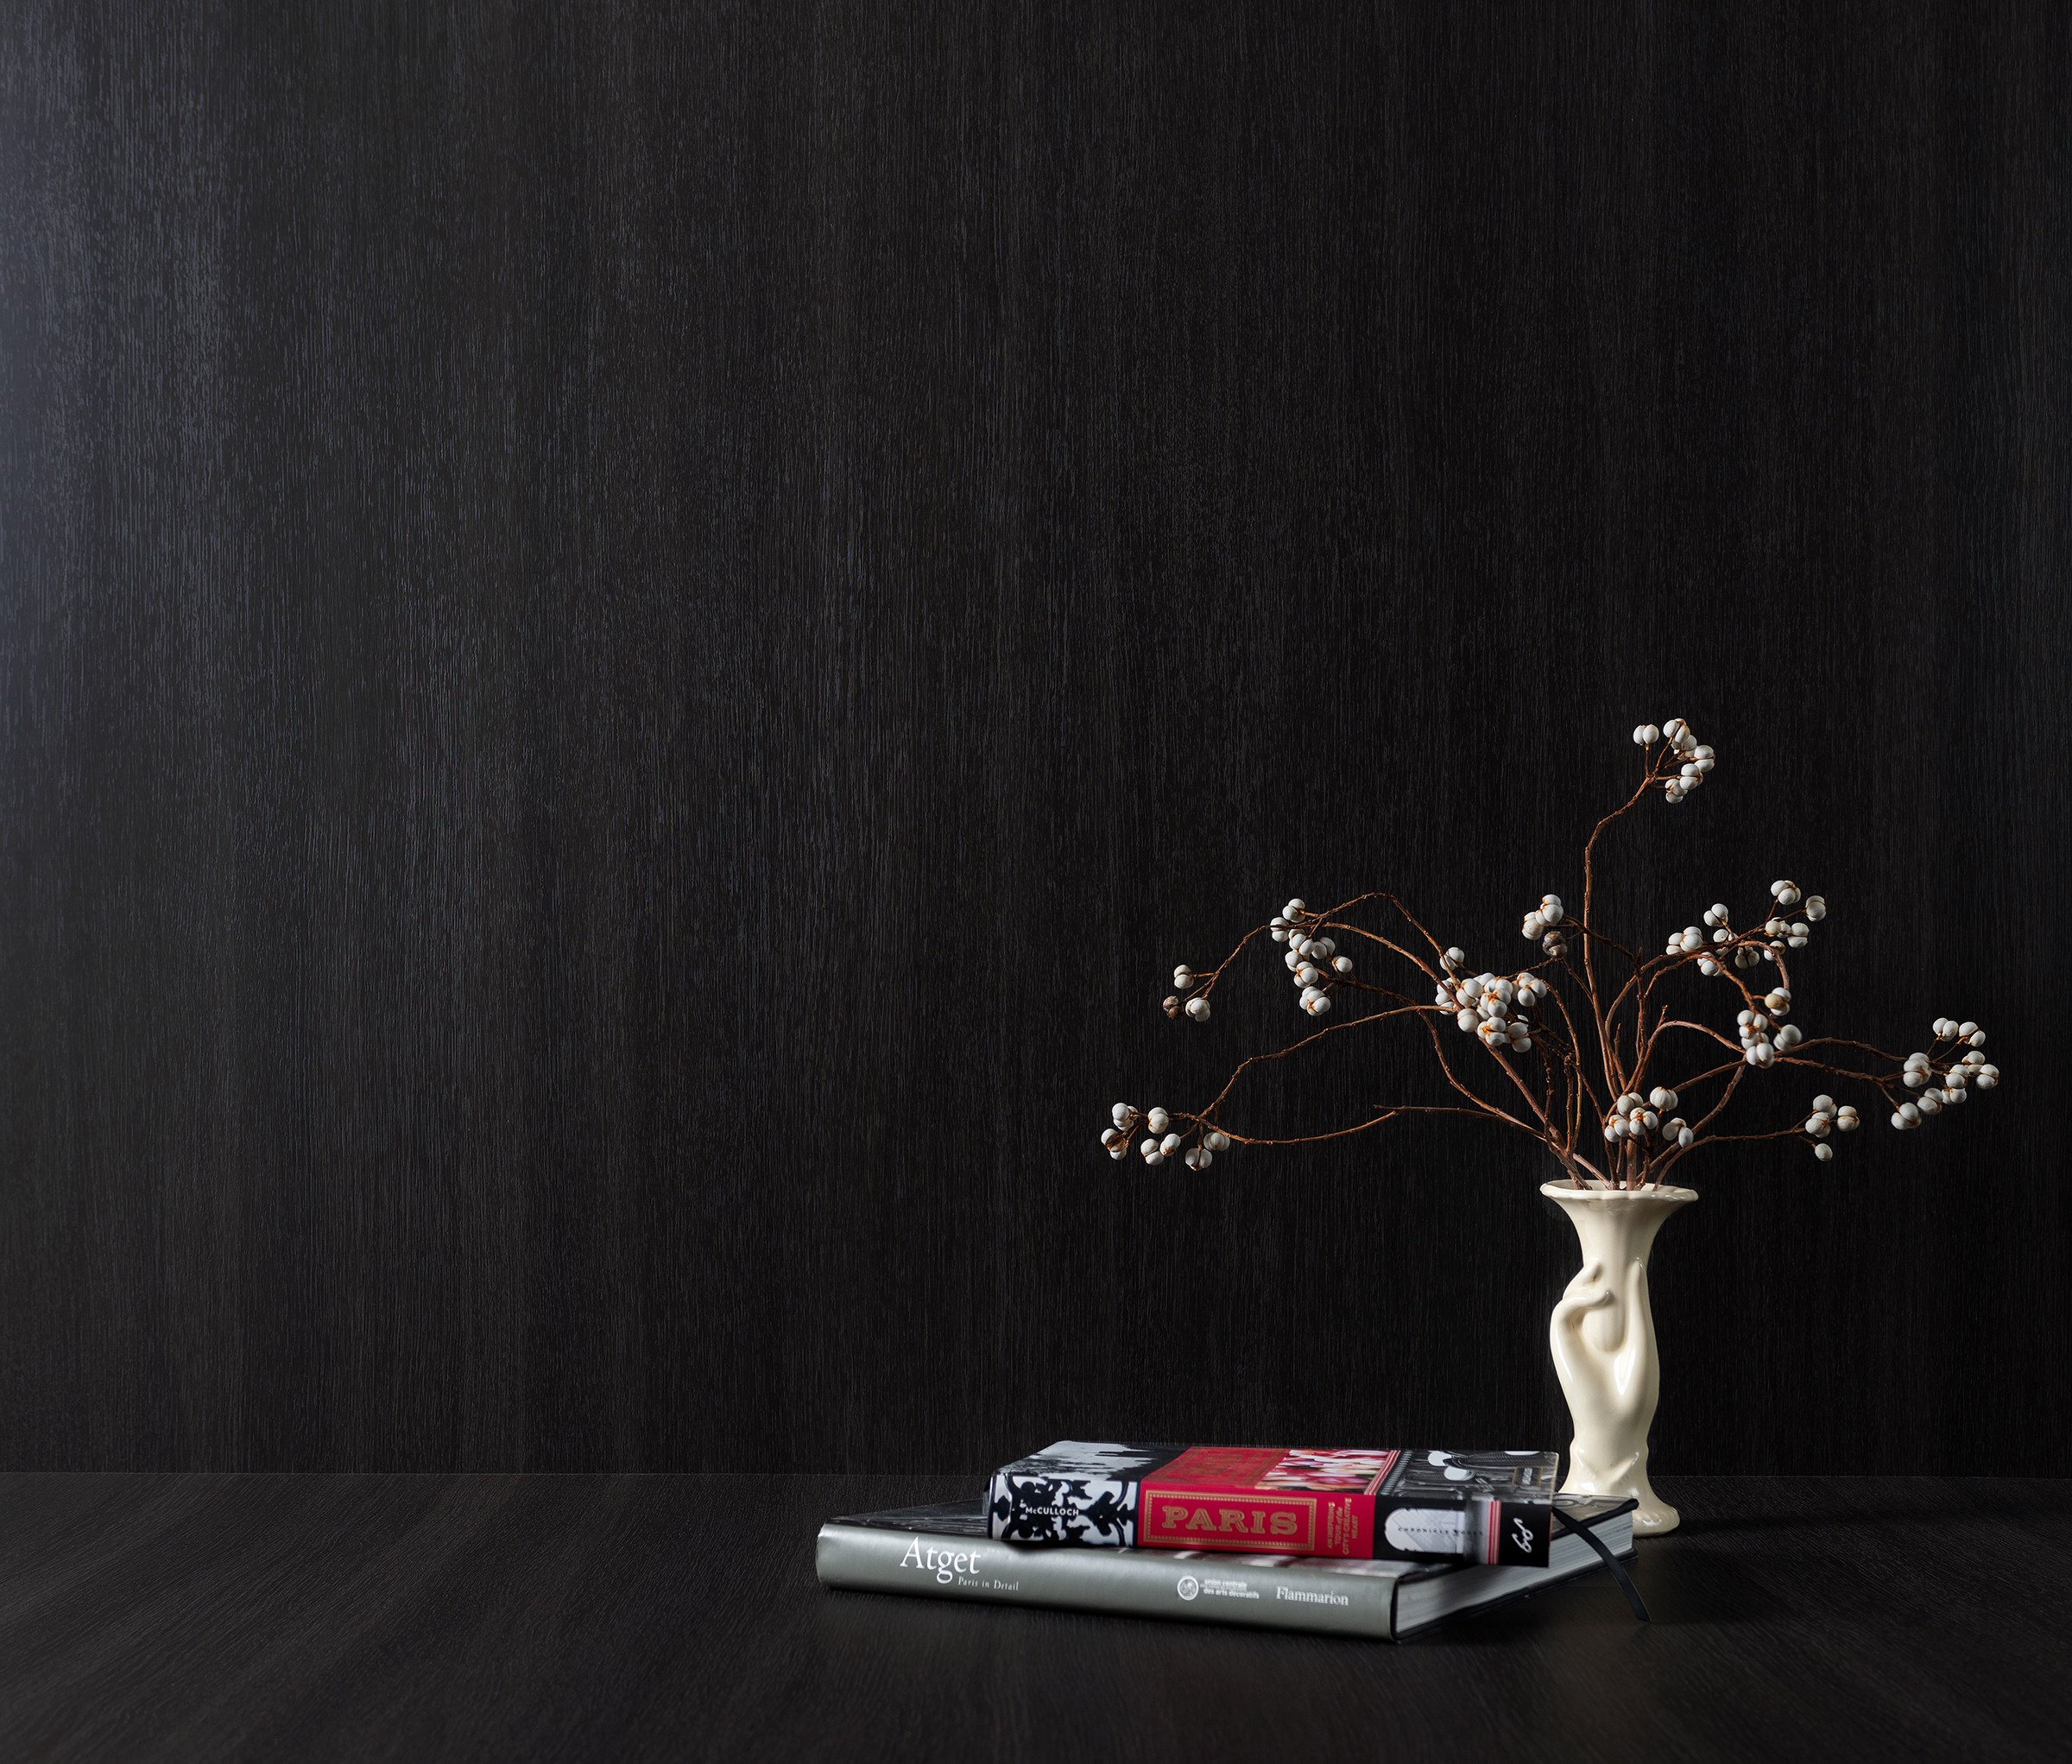 The Nature/Nurture Collection by Wilsonart: Nine new woodgrain styles that combine the best of nature with exceptional engineering. The luxurious collection of dimensional wood-textured laminate surfaces help cultivate a unique sense of place and remarkable aesthetic appeal in commercial spaces.